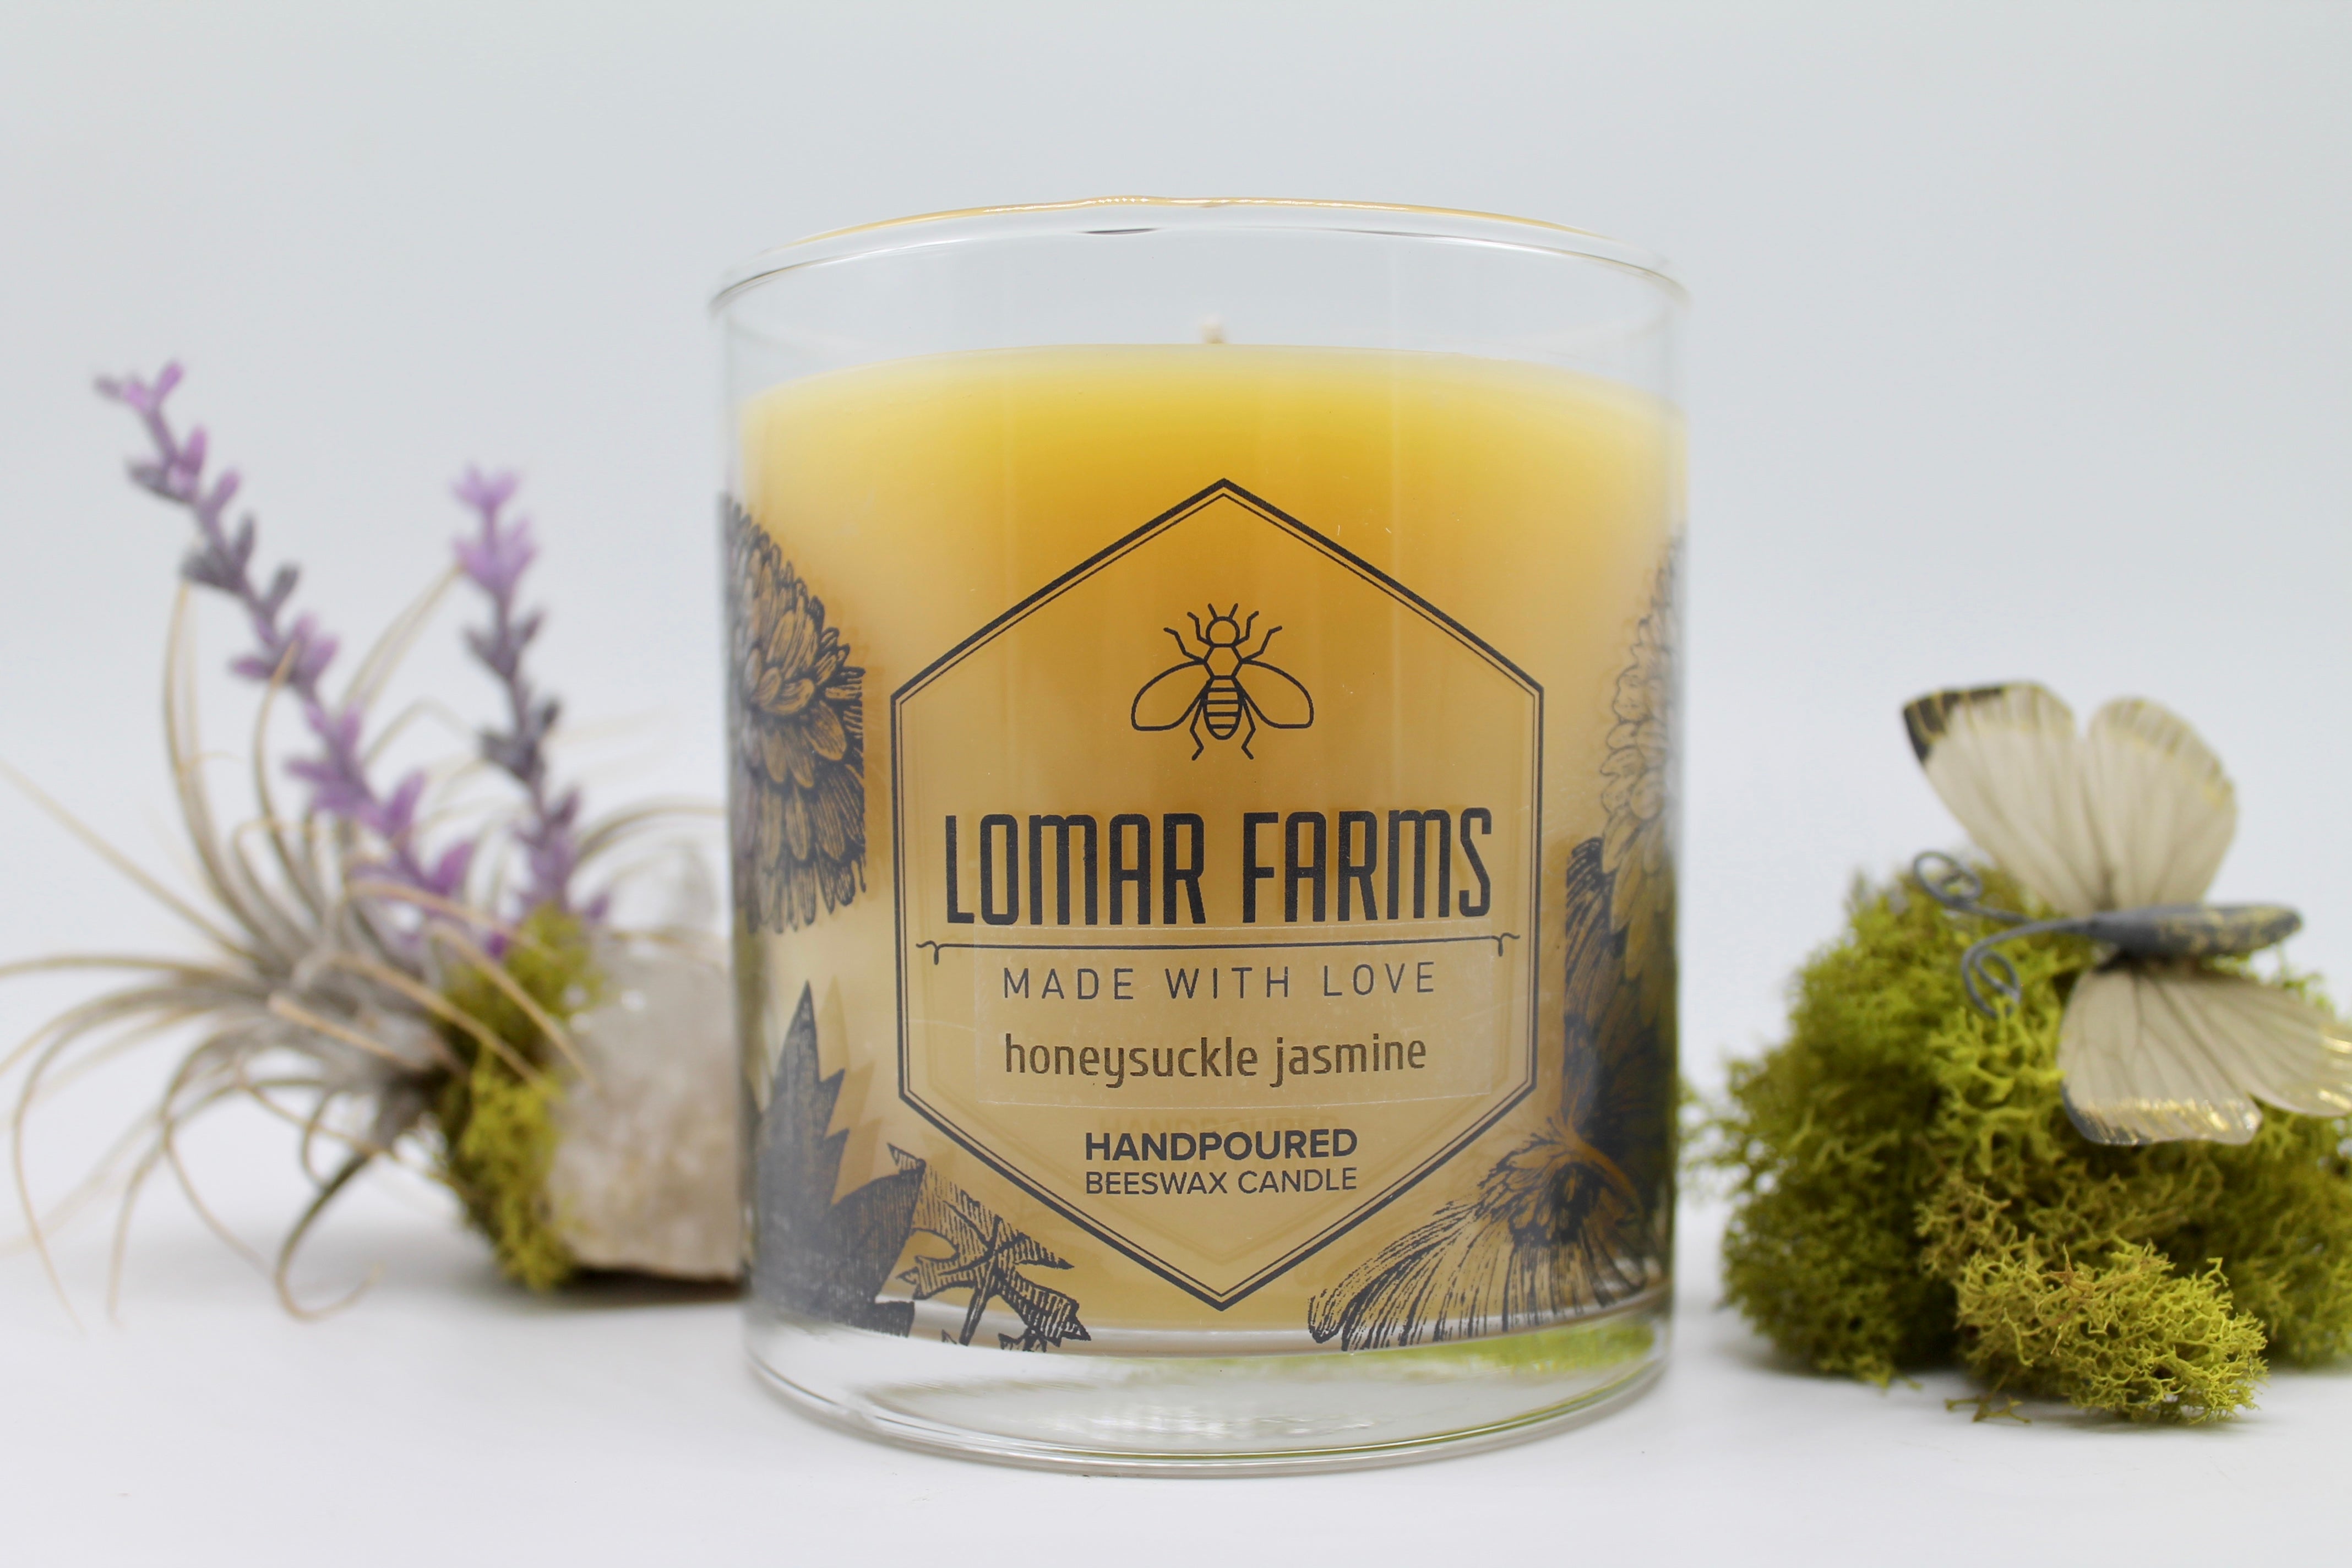 Local Honey and Bees Wax Candles - farm & garden - by owner - sale -  craigslist